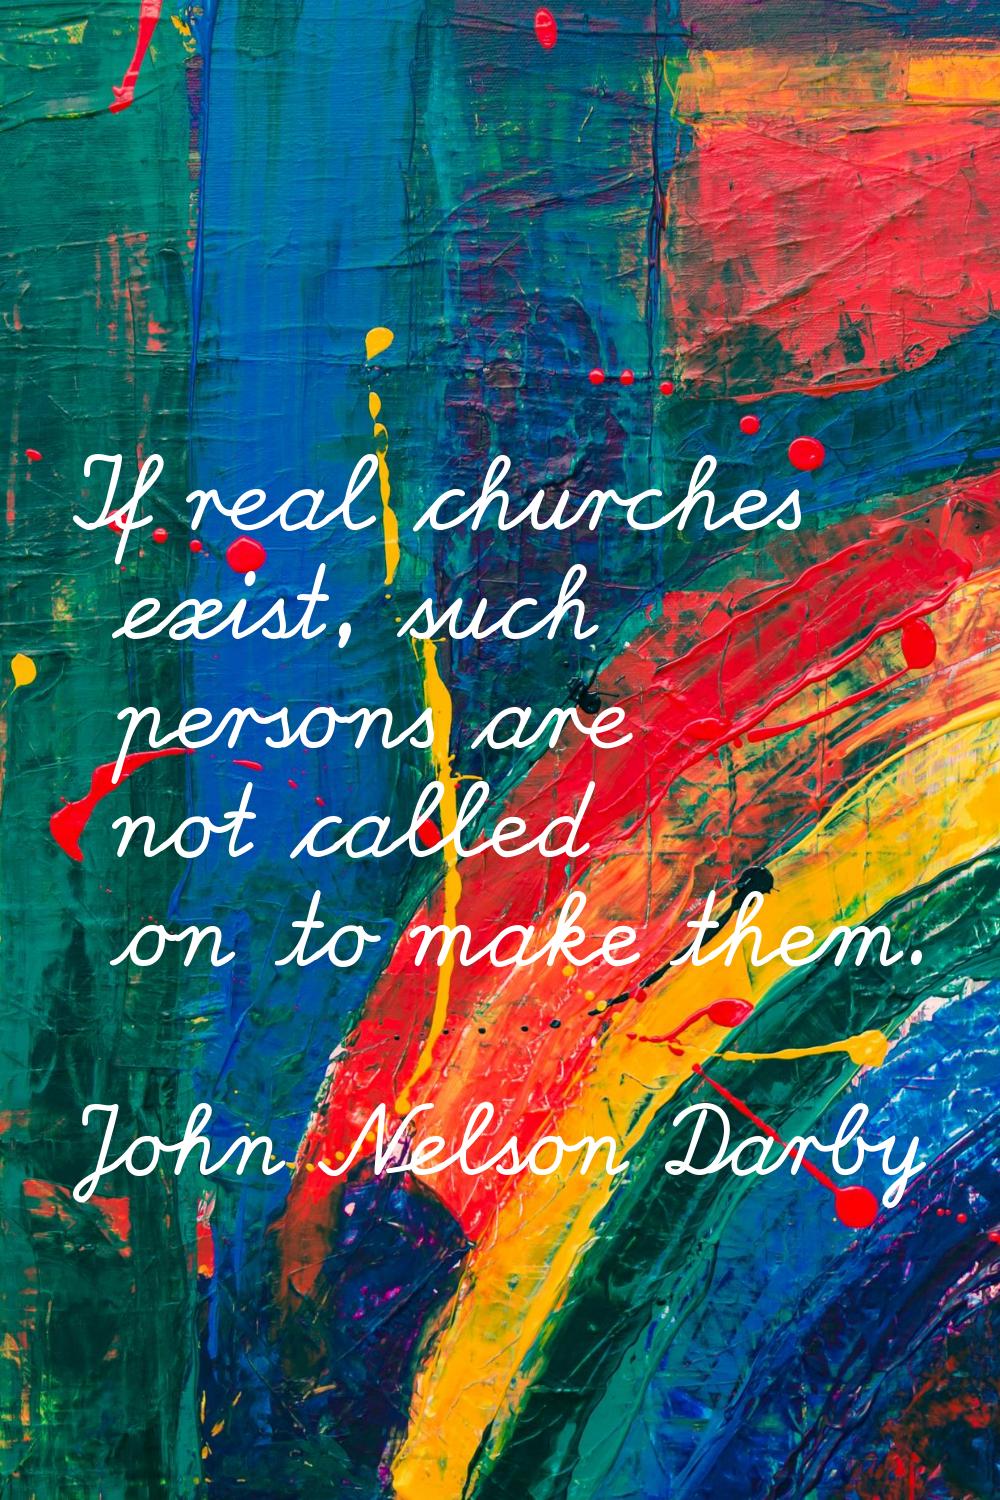 If real churches exist, such persons are not called on to make them.